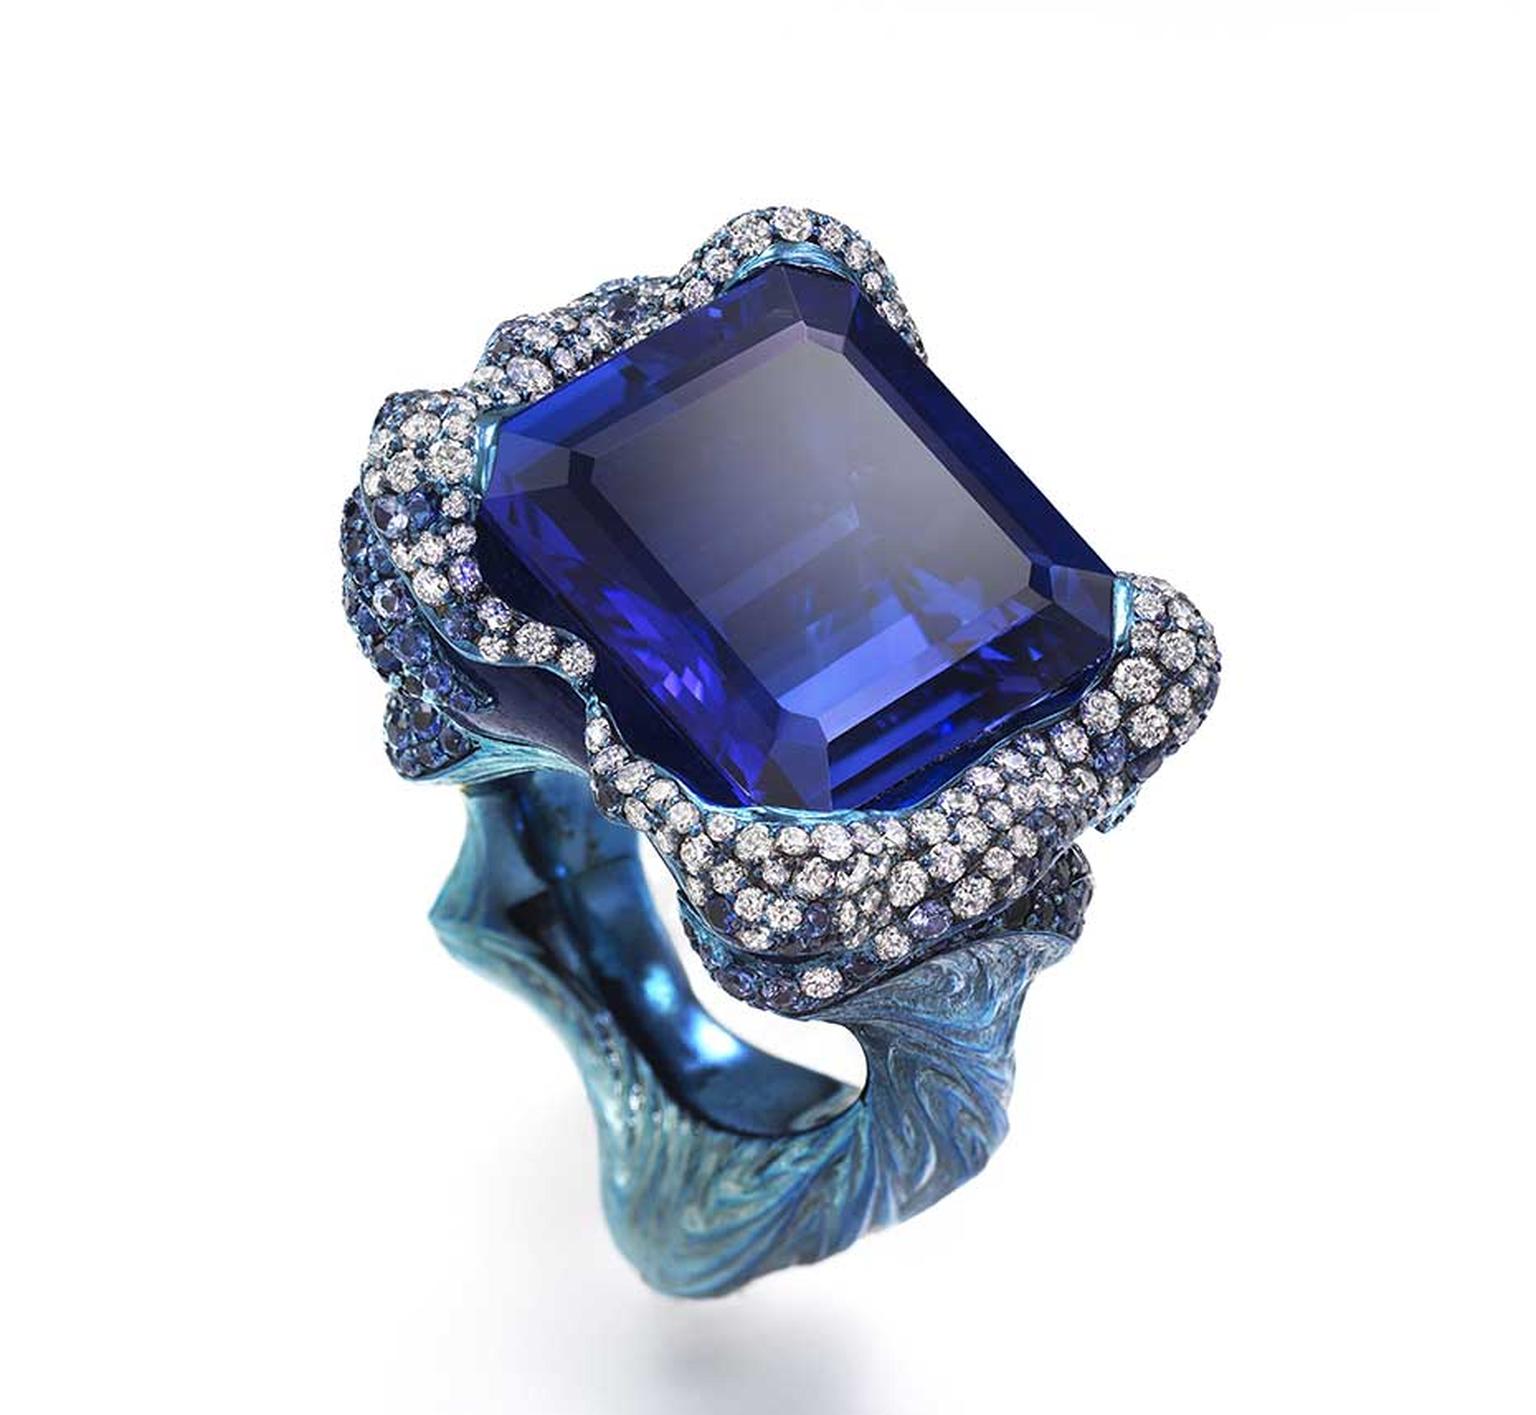 Wallace Chan The Tempest tanzanite ring, set with a "calm and mysterious" 22.28ct tanzanite.